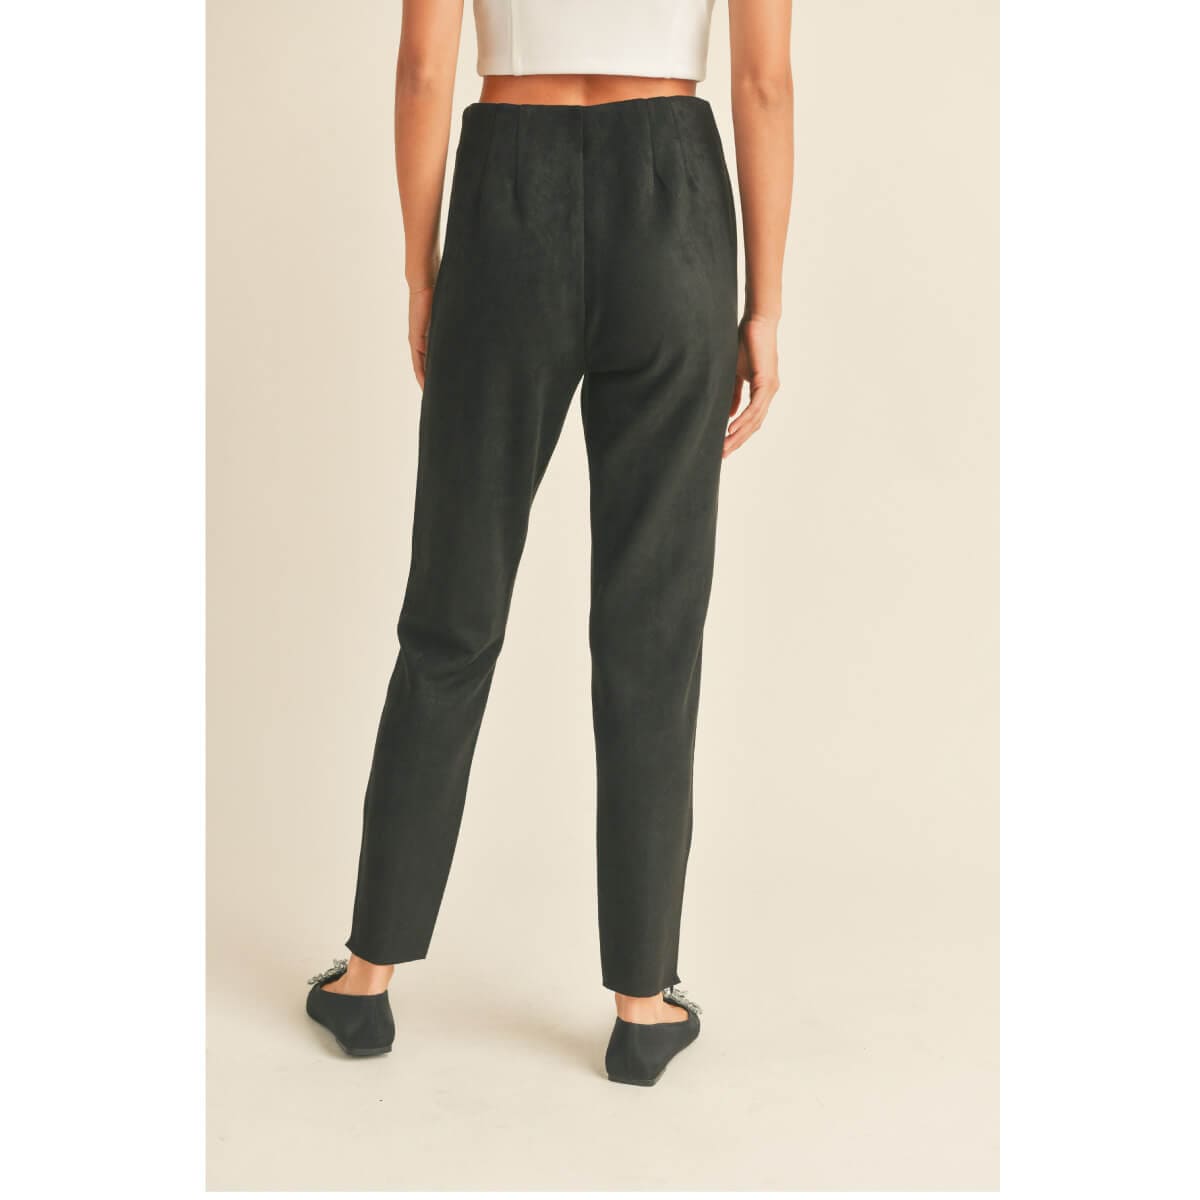 Cropped High Waisted Suede Pants black back | MILK MONEY milkmoney.co | cute pants for women. cute trendy pants.